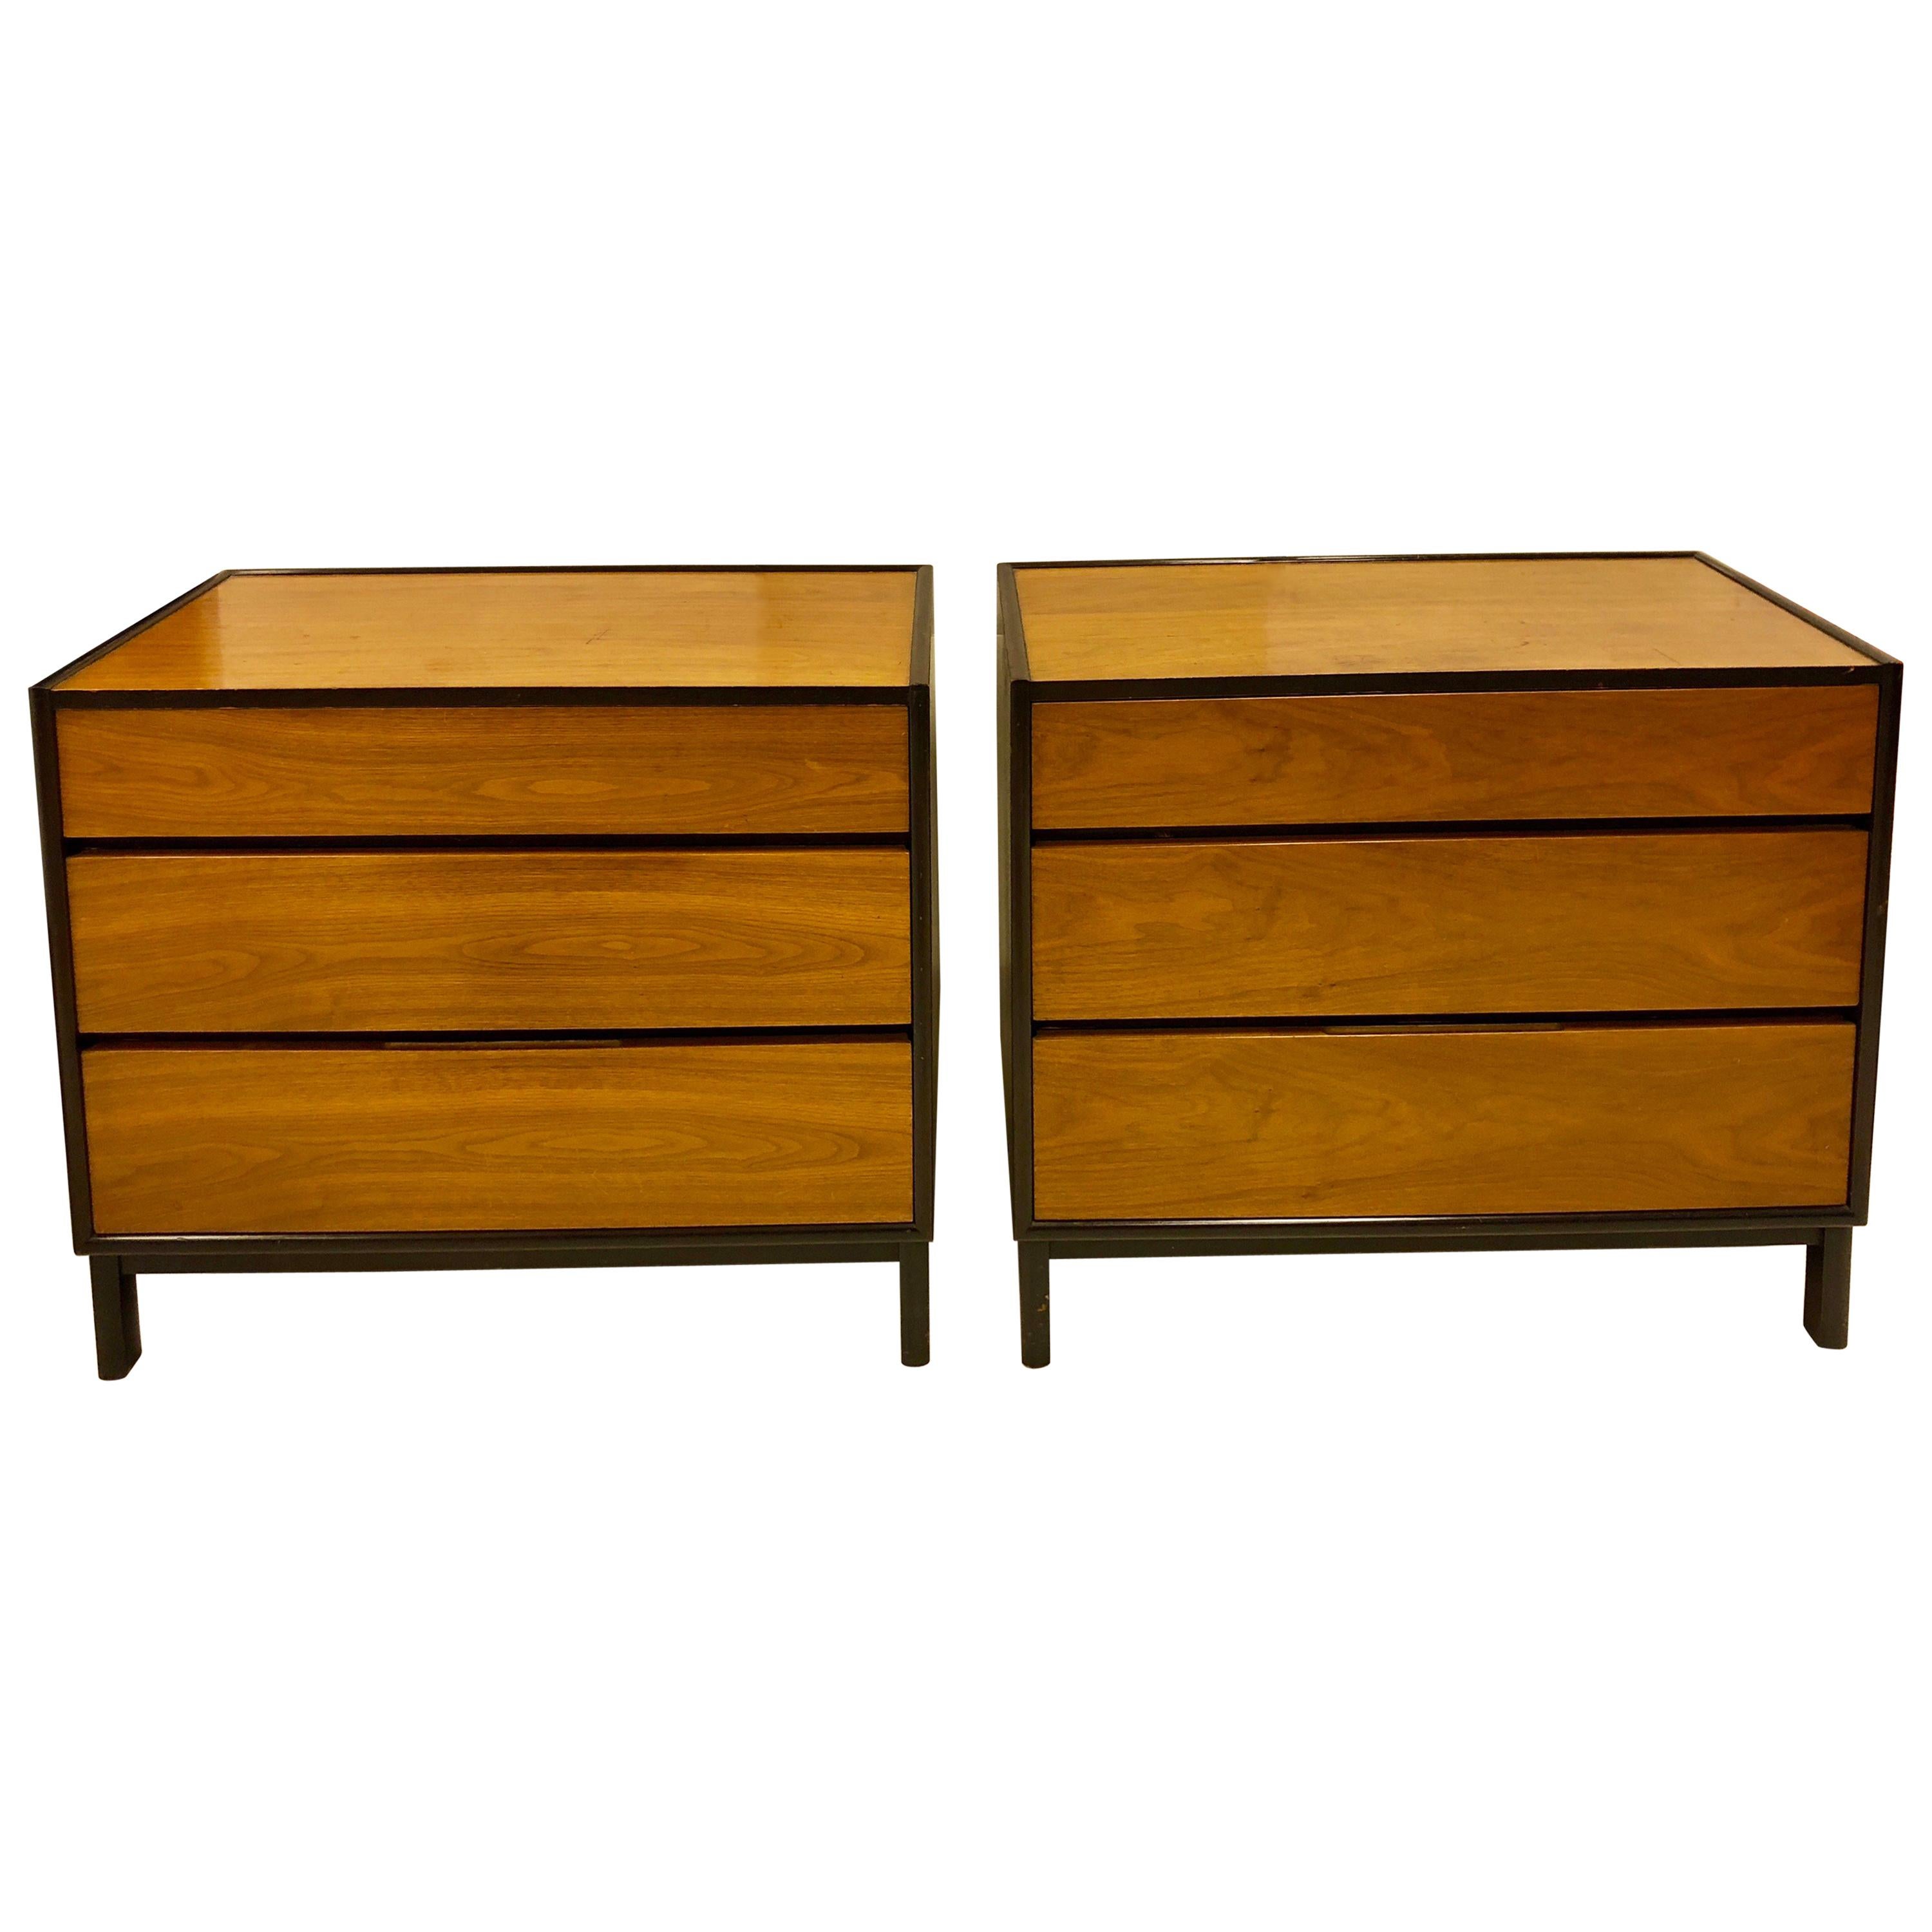 Pair of Edward Wormley Designed Commodes for Dunbar